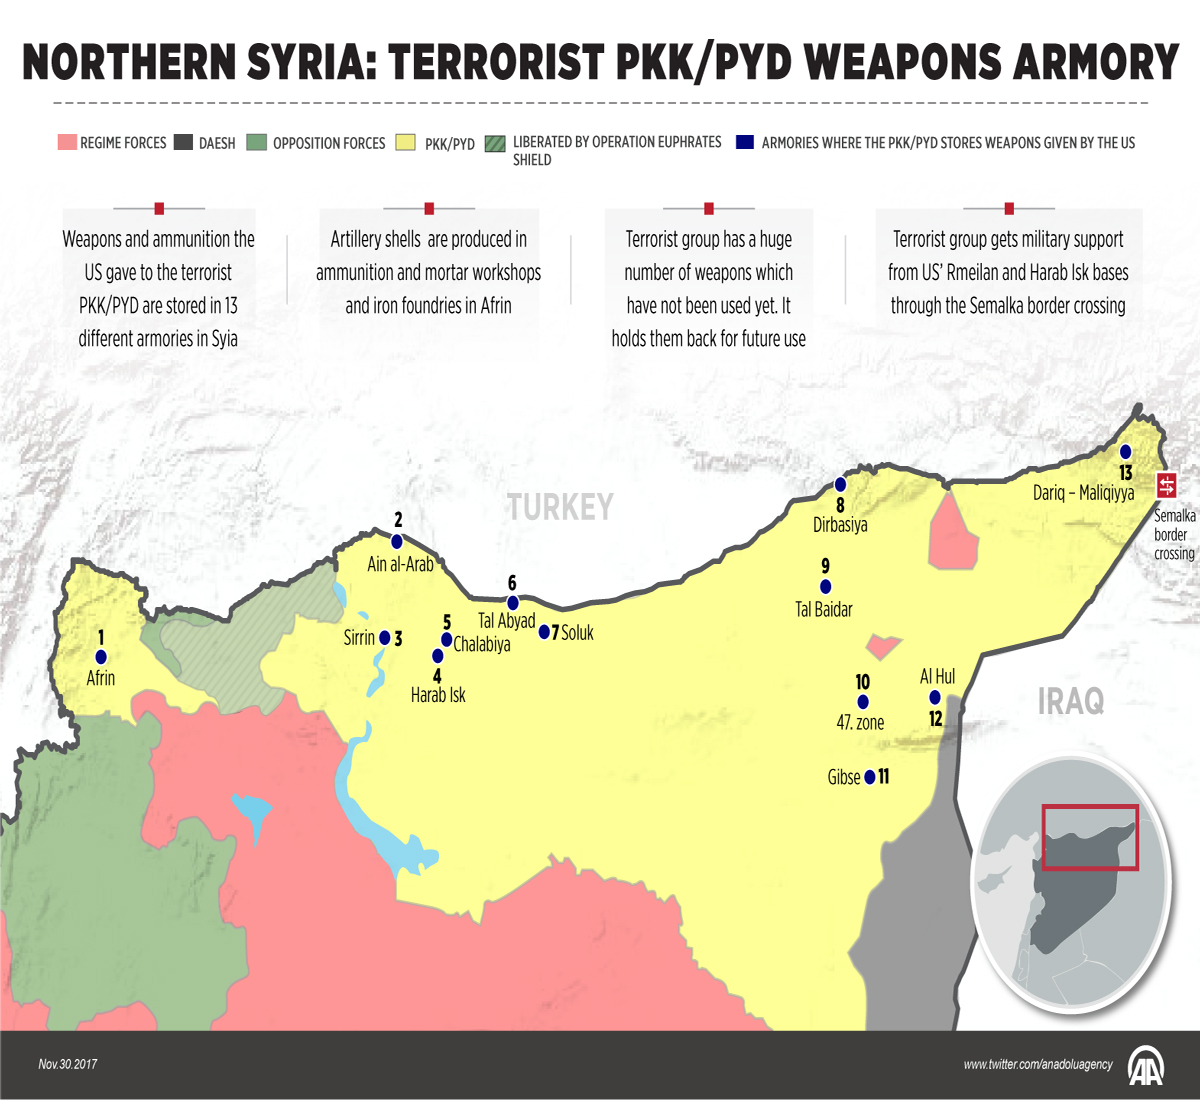 PKK/PYD’s armory in northern Syria 